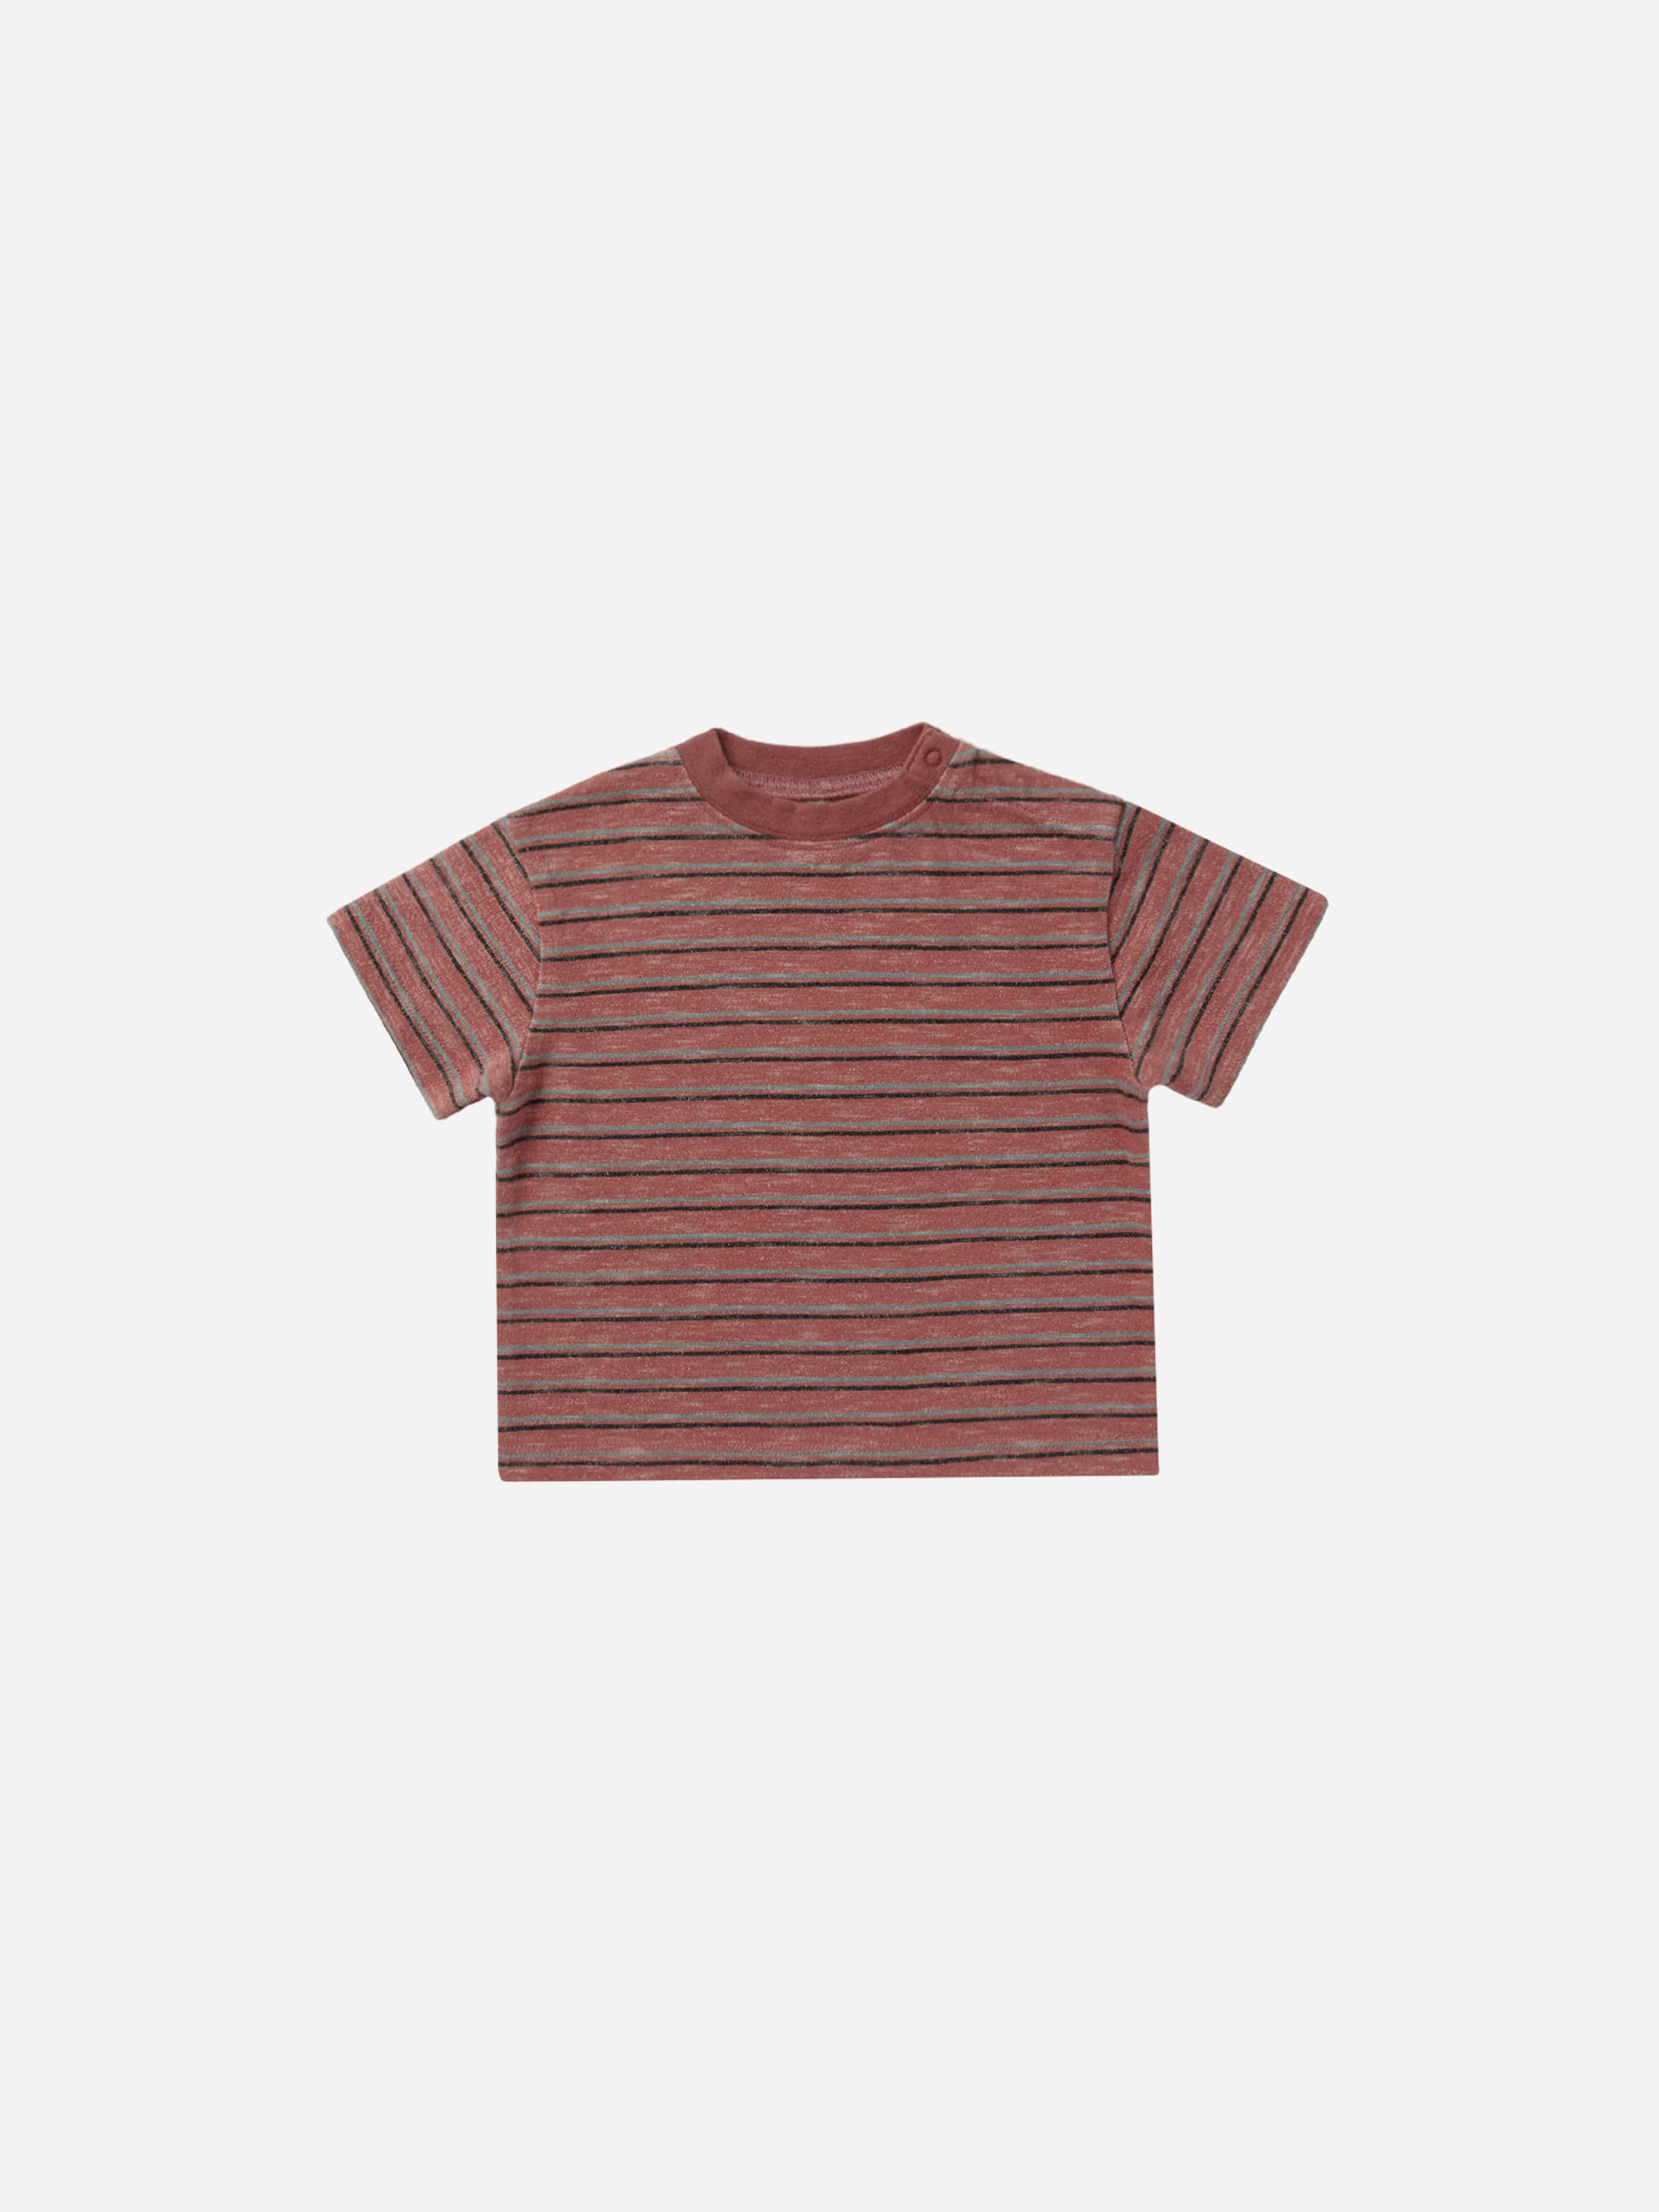 Relaxed Tee || Red Multi-Stripe - Rylee + Cru | Kids Clothes | Trendy Baby Clothes | Modern Infant Outfits |